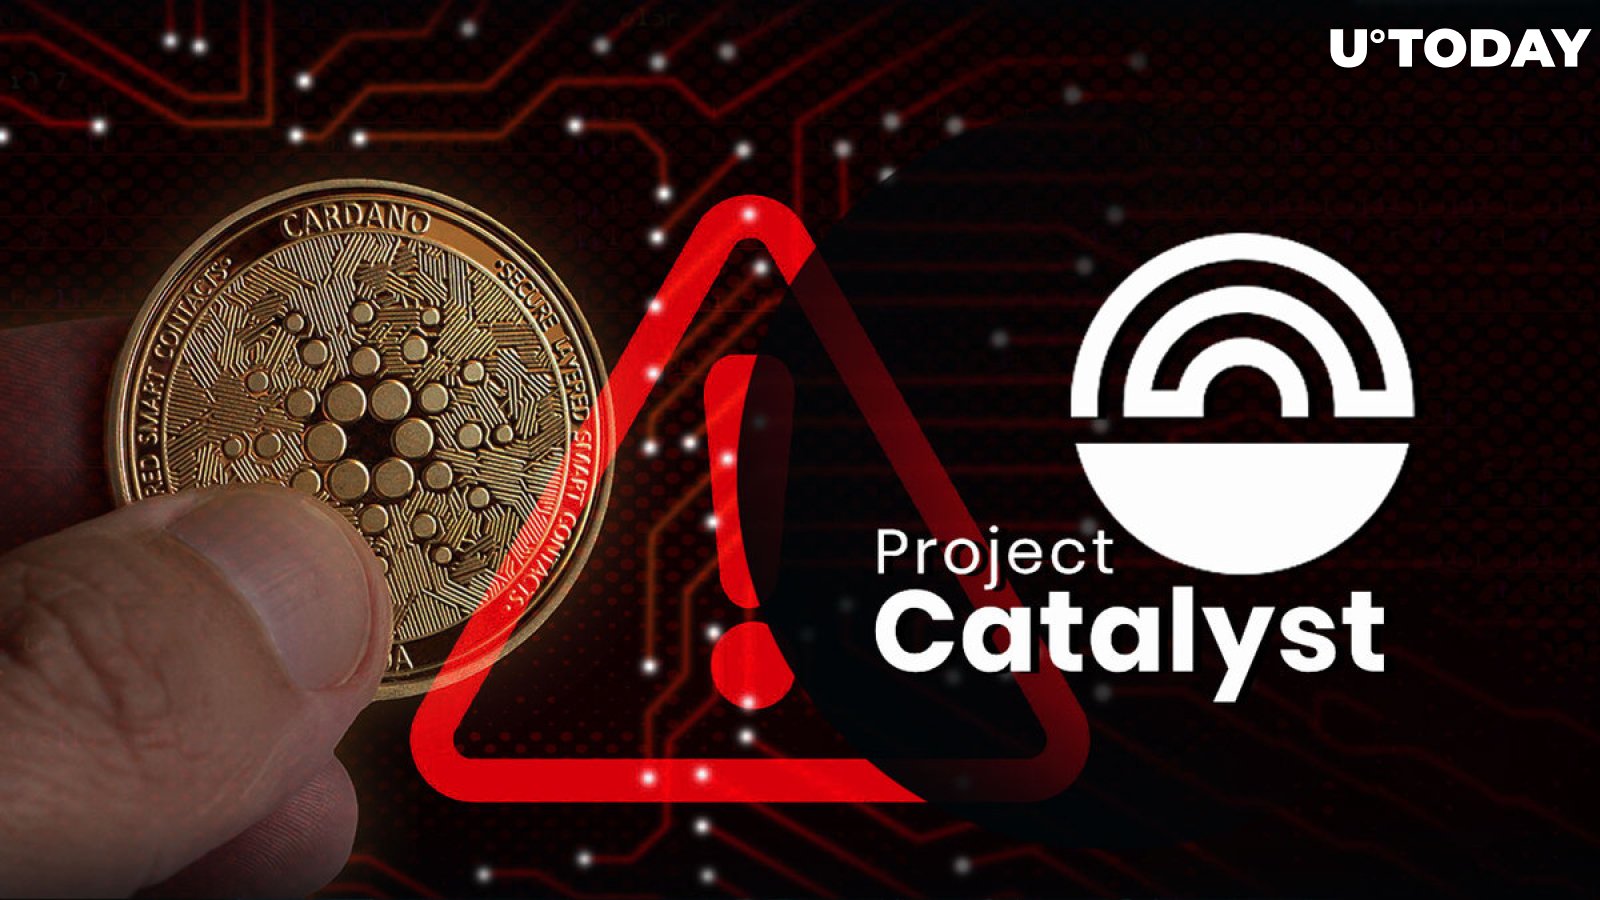 Cardano Drama: This Grifter Company Targets $5.8+ Million From Catalyst Fund 10